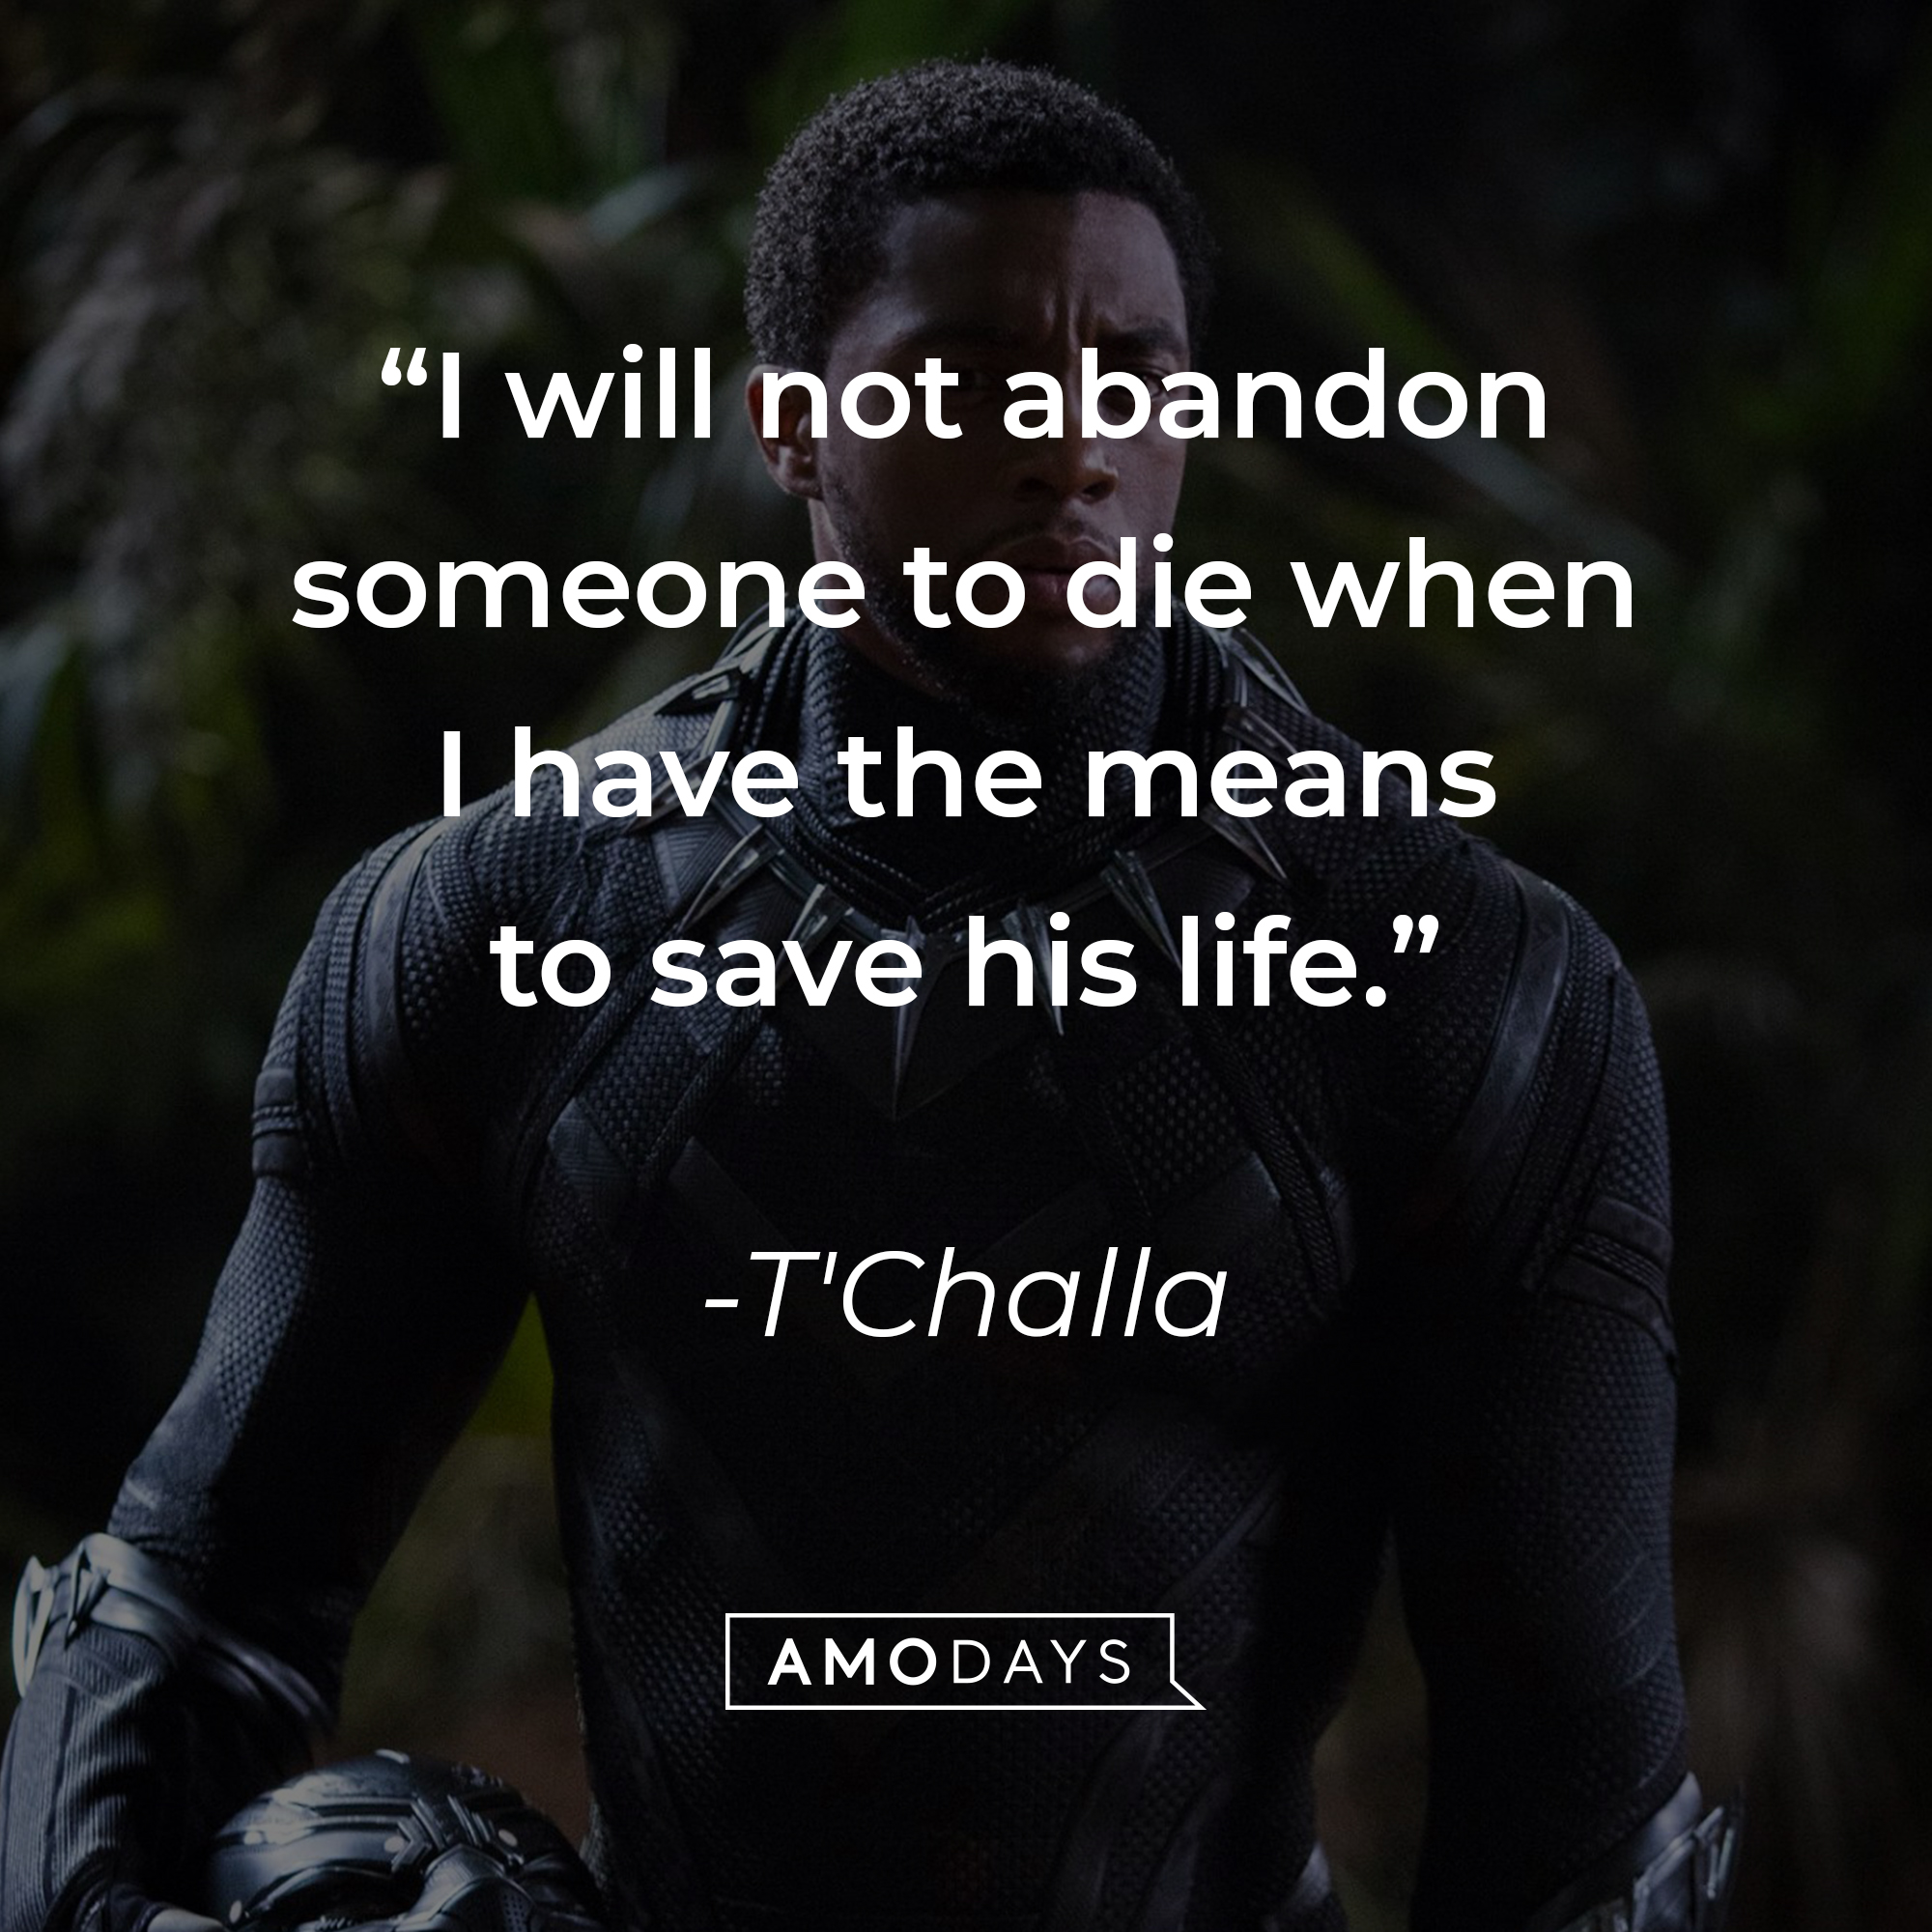 T'Challa's quote: “I will not abandon someone to die when I have the means to save his life.” | Source: facebook.com/BlackPantherMovie